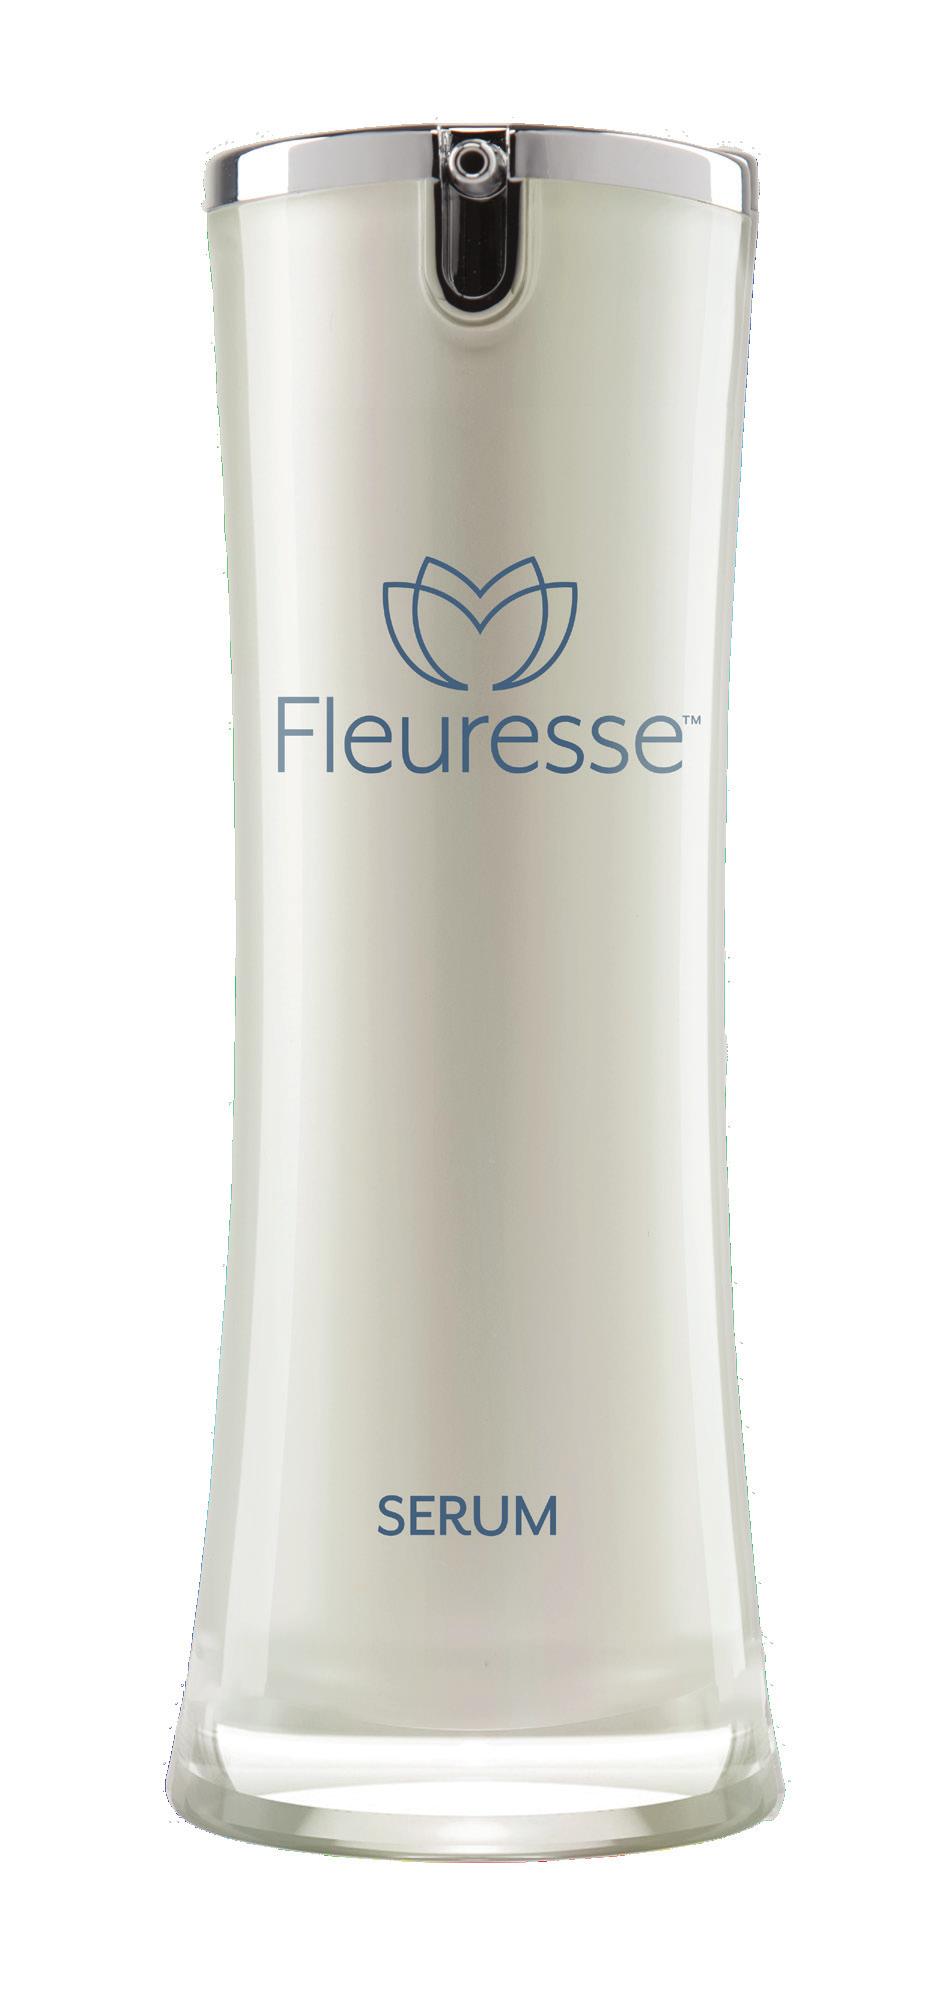 SERUM Fleuresse Serum is a light and refreshing serum, derived from naturally occurring botanicals found in plant stem cells, that rejuvenates the skin, helps protect against fine lines and wrinkles,